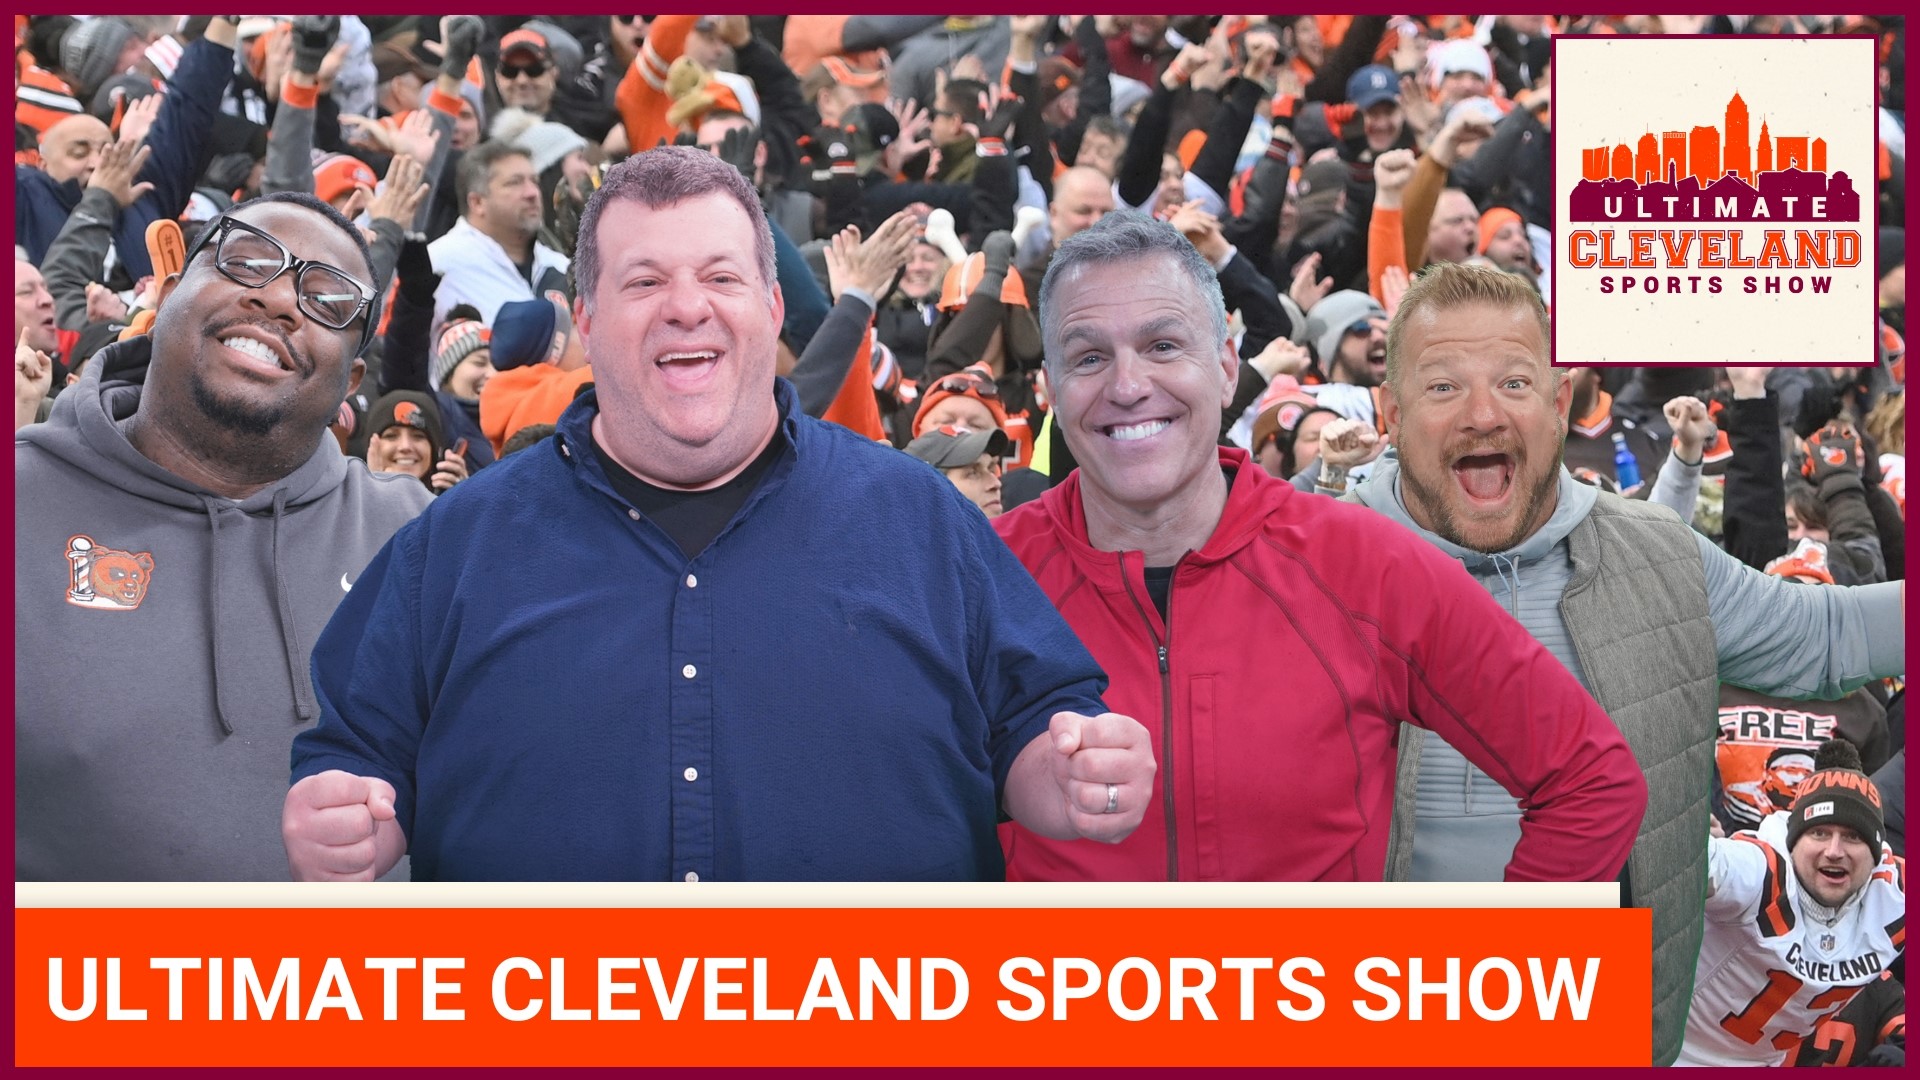 The Ultimate Cleveland Sports Show is a daily one-stop shop for Cleveland Browns, Guardians and Cavaliers fans and sports fans throughout Northeast Ohio